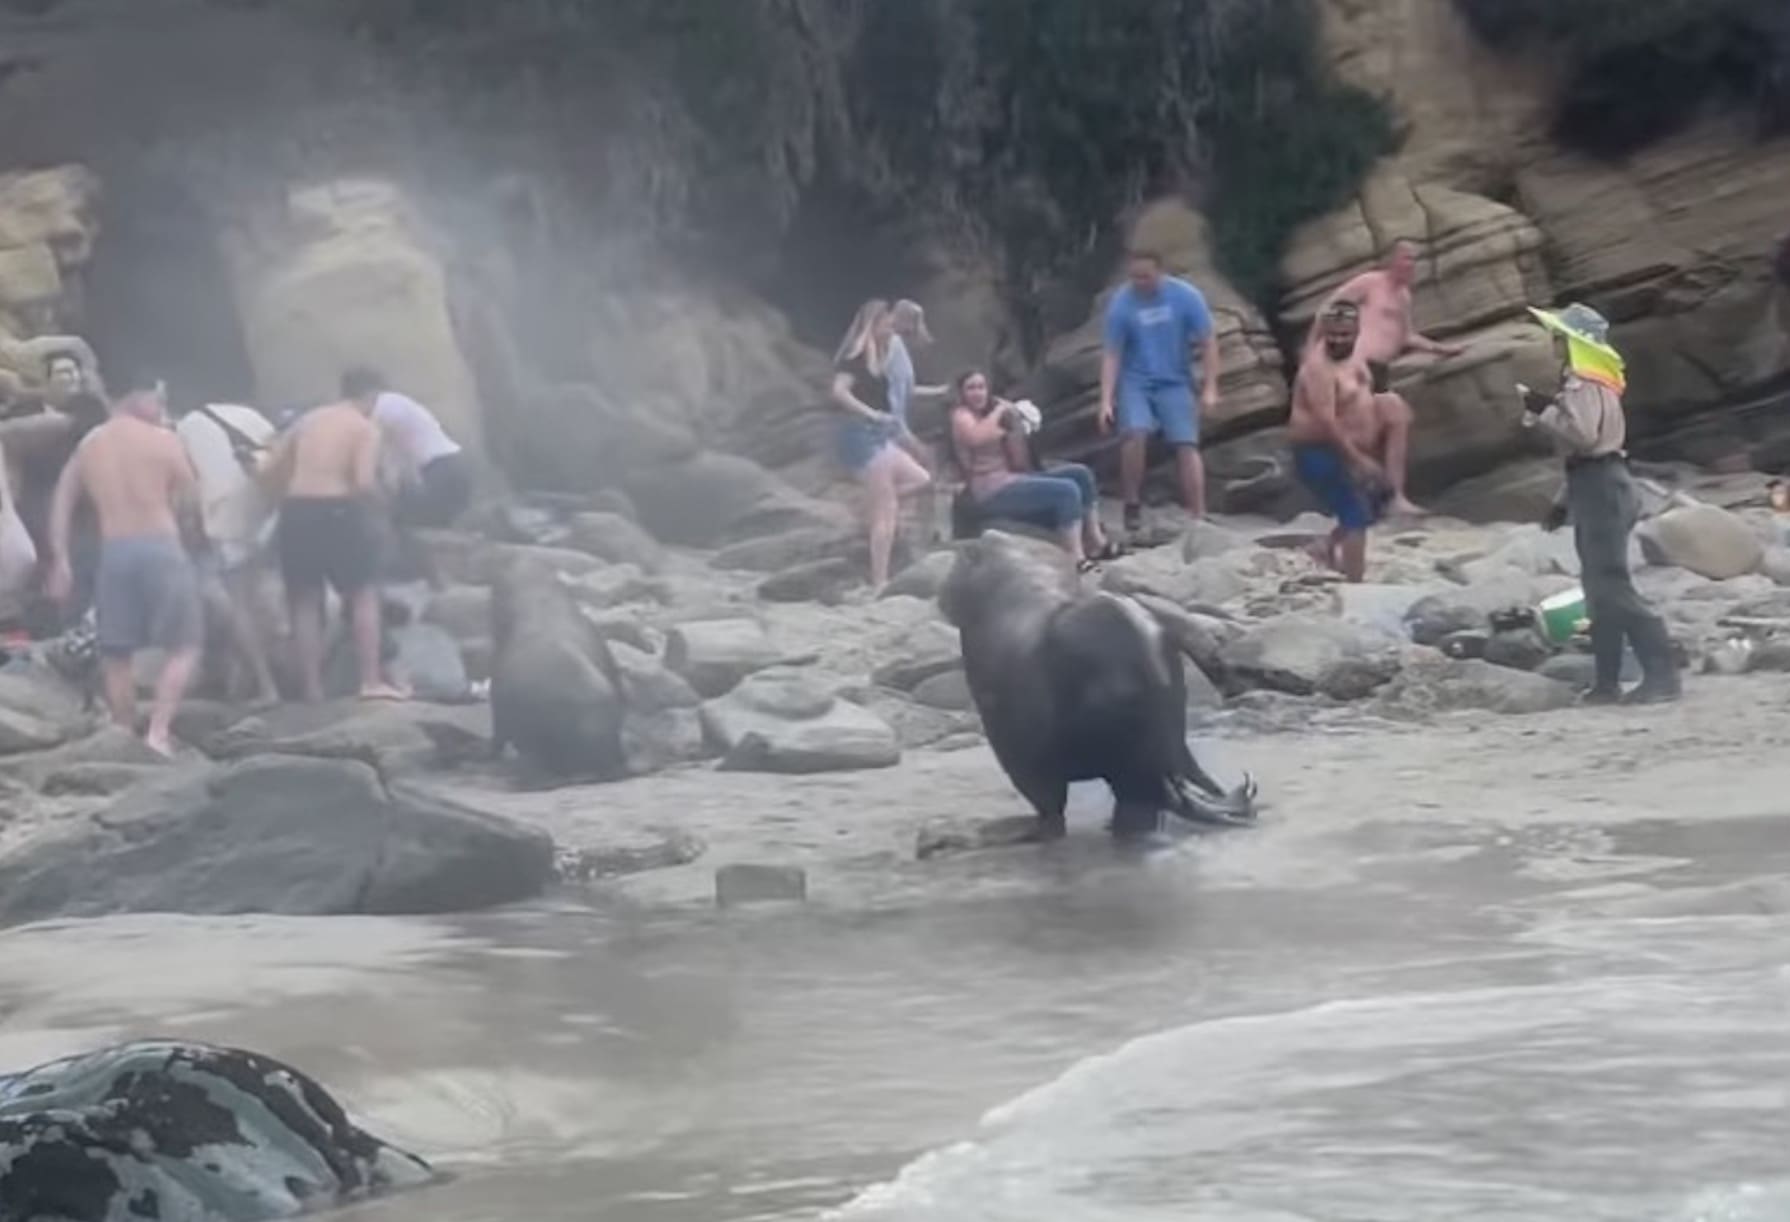 Video Shows Sea Lions Chase Beachgoers at La Jolla Cove in San Diego,  California